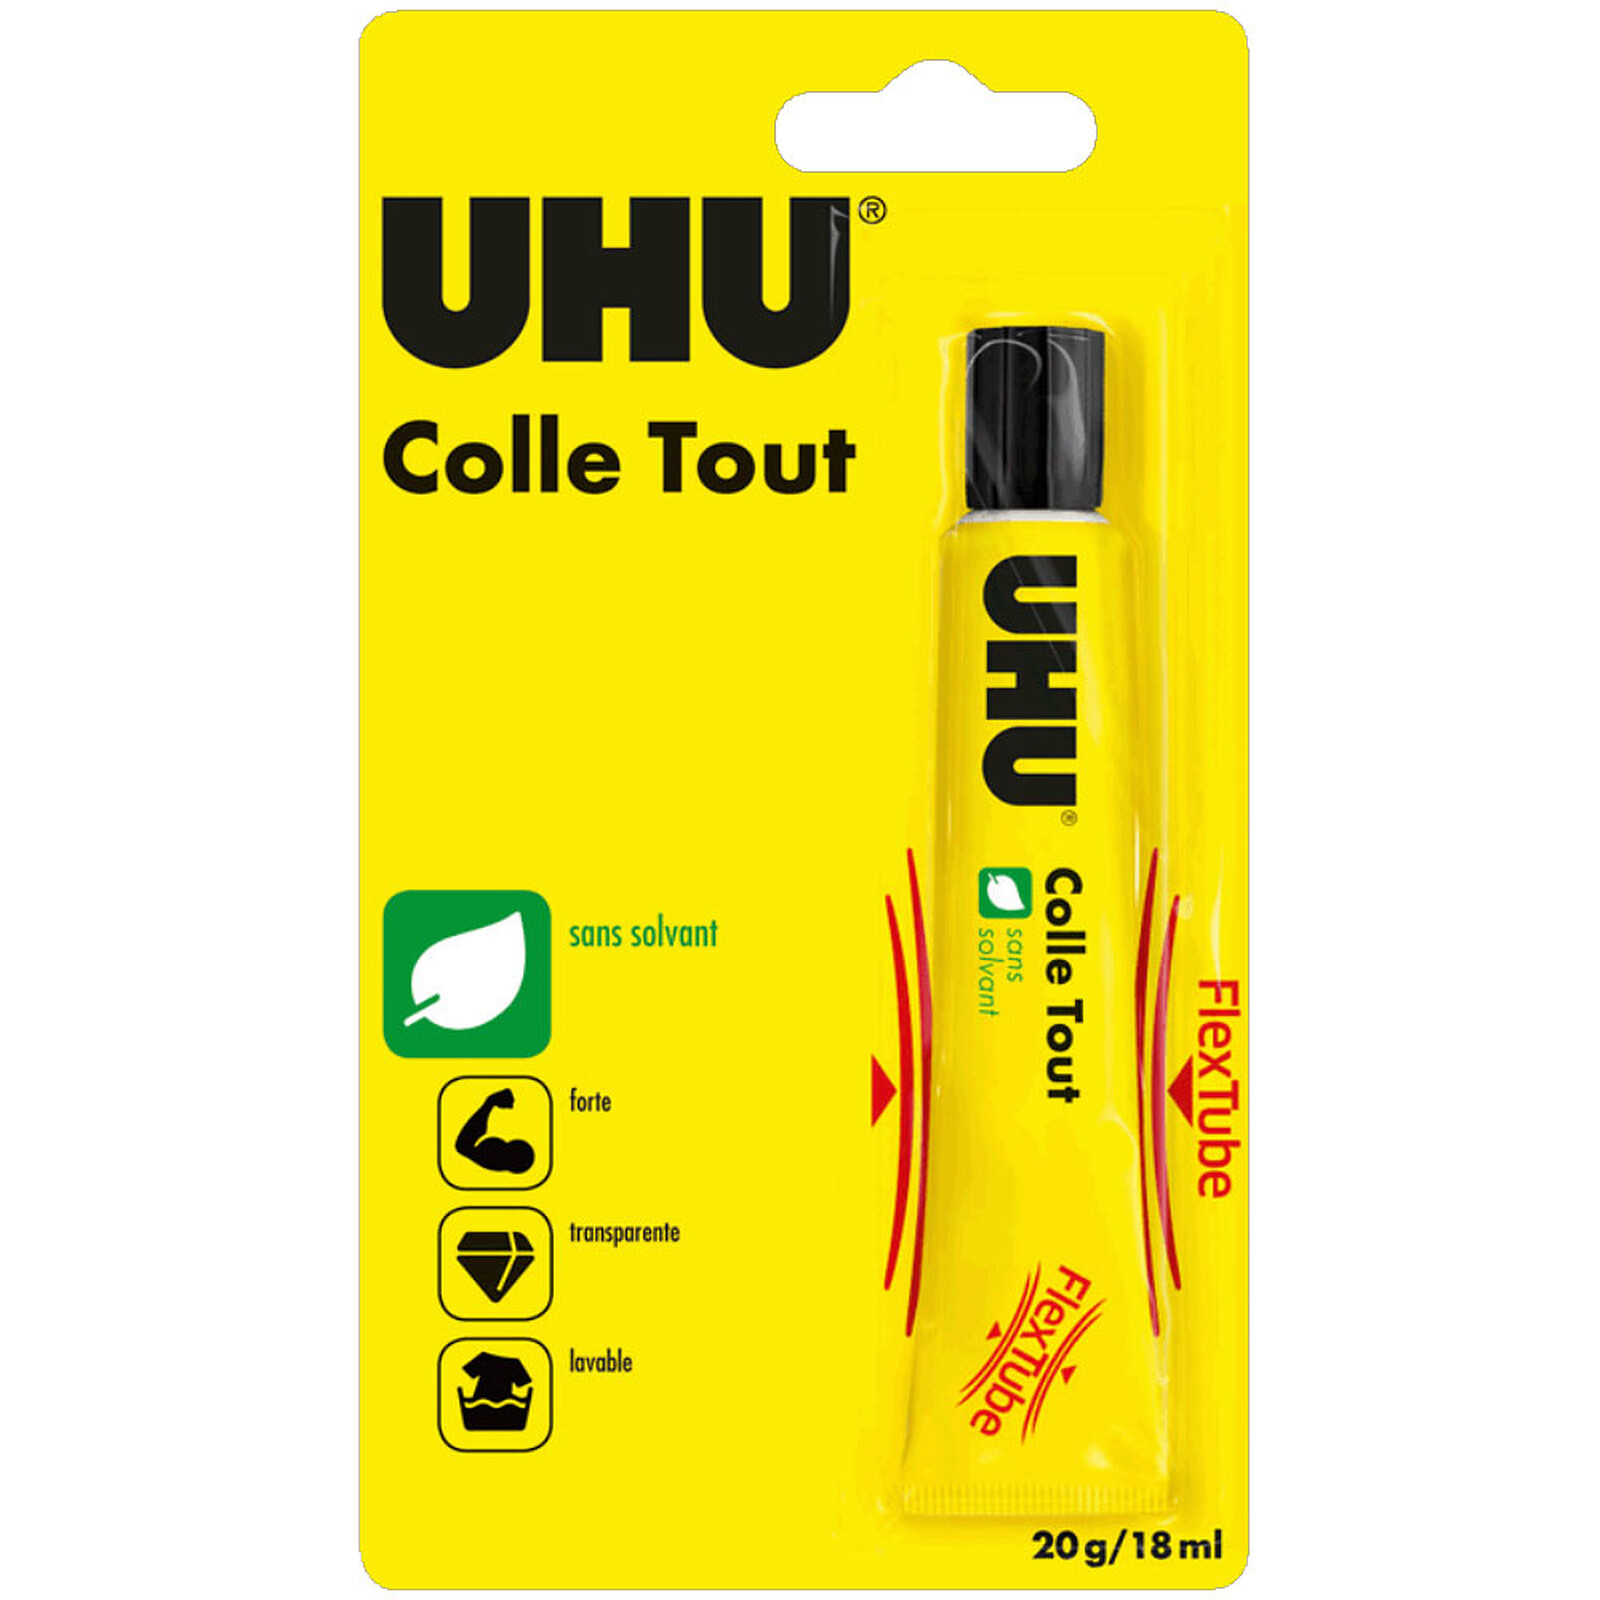 UHU colle forte universellle, 650 g